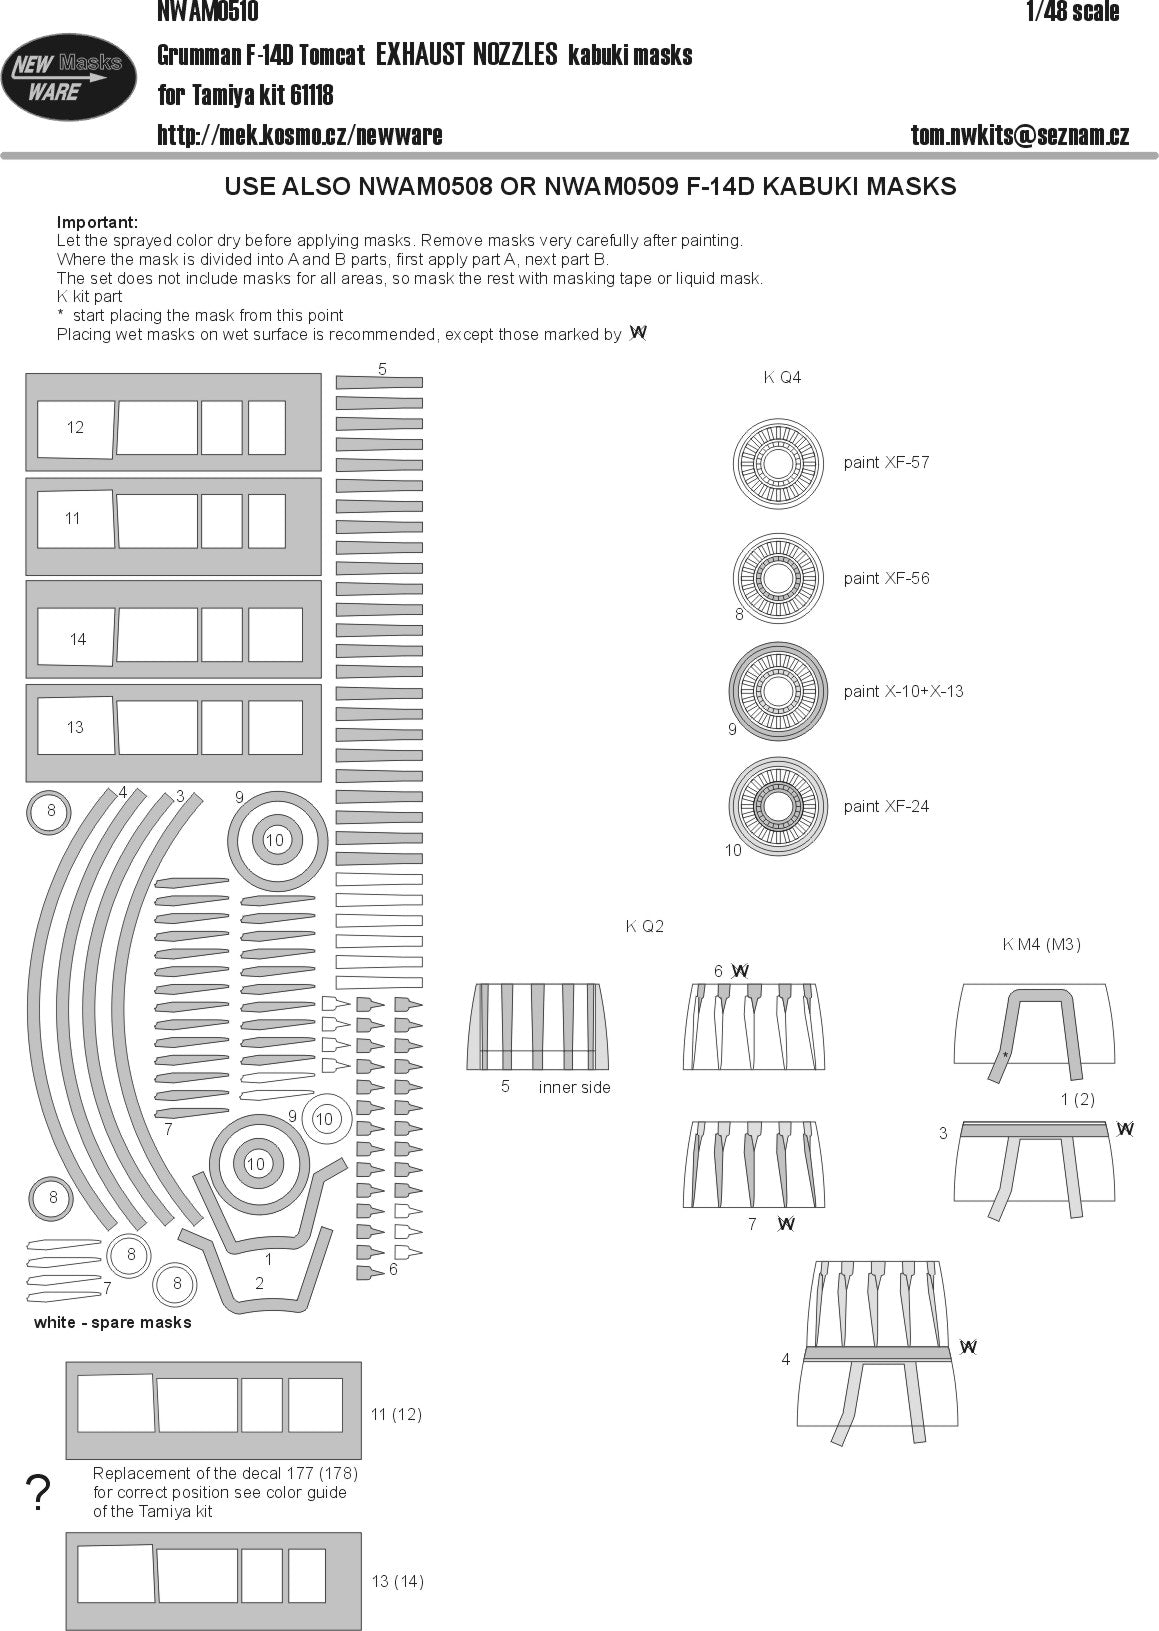 New Ware 0510 - Masking set for Tamiya 1/48 F-14D Tomcat Exhaust Nozzles